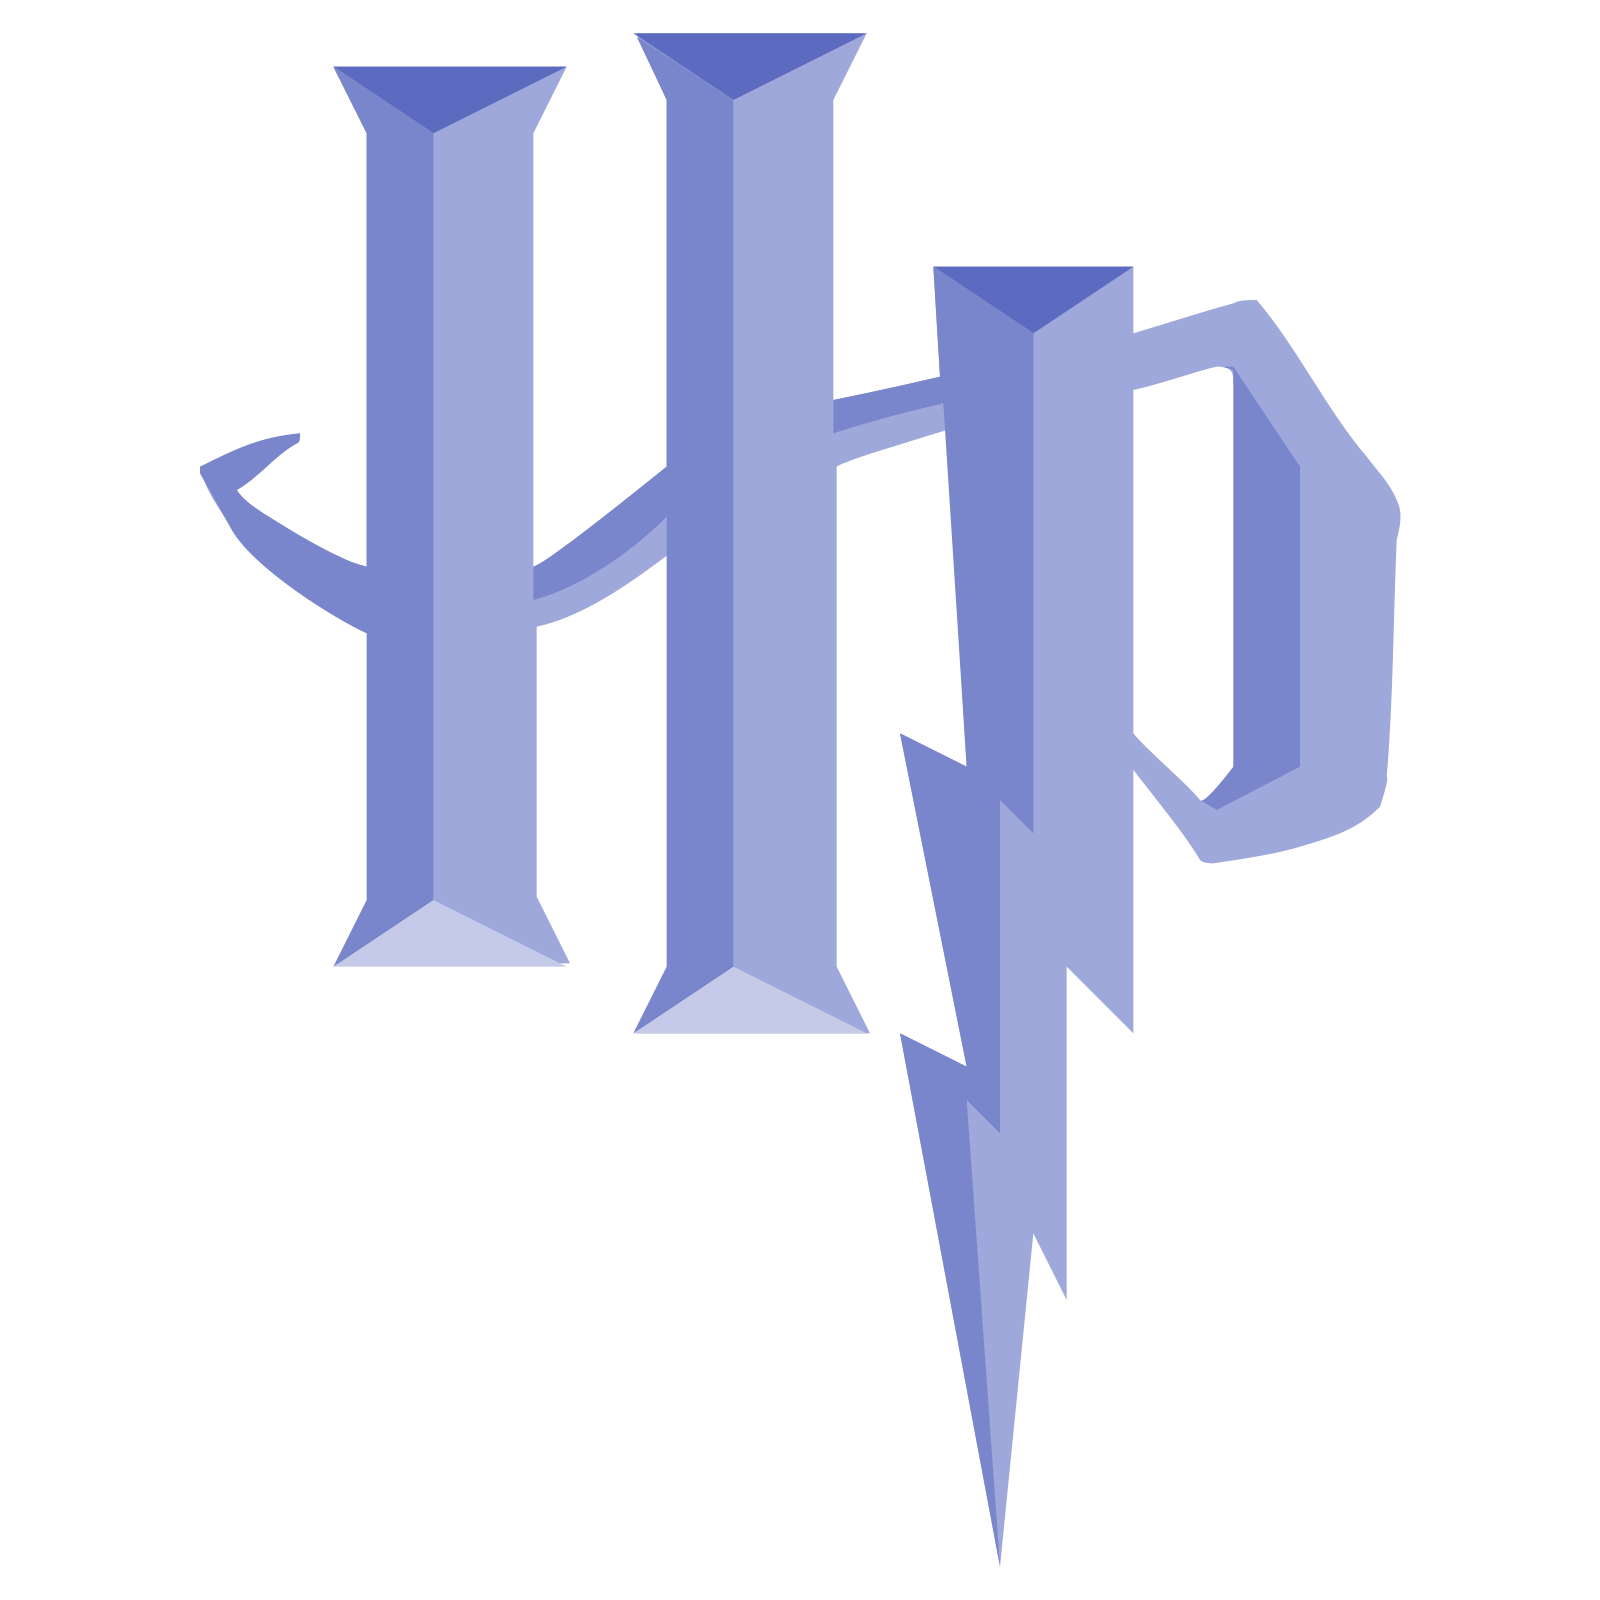 Harry Potter Icon - free download, PNG and vector